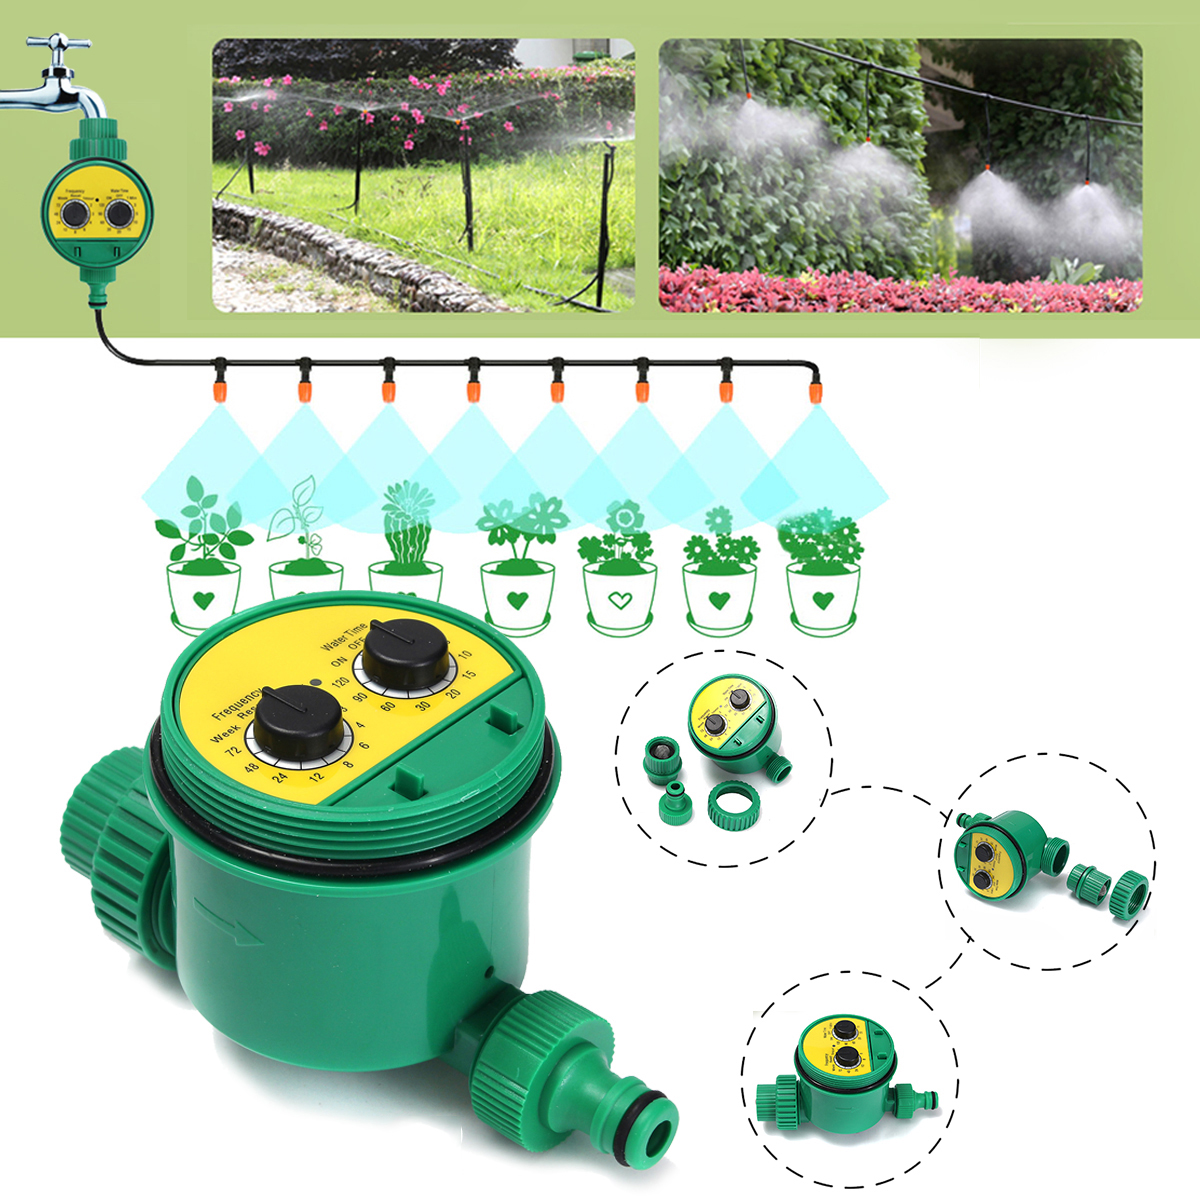 Garden-Irrigation-Controller-Two-Dial-Electronic-Water-Timer-Home-Plant-Flower-1074354